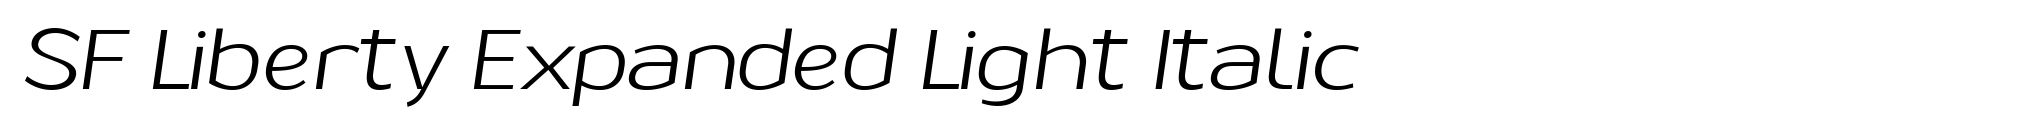 SF Liberty Expanded Light Italic image